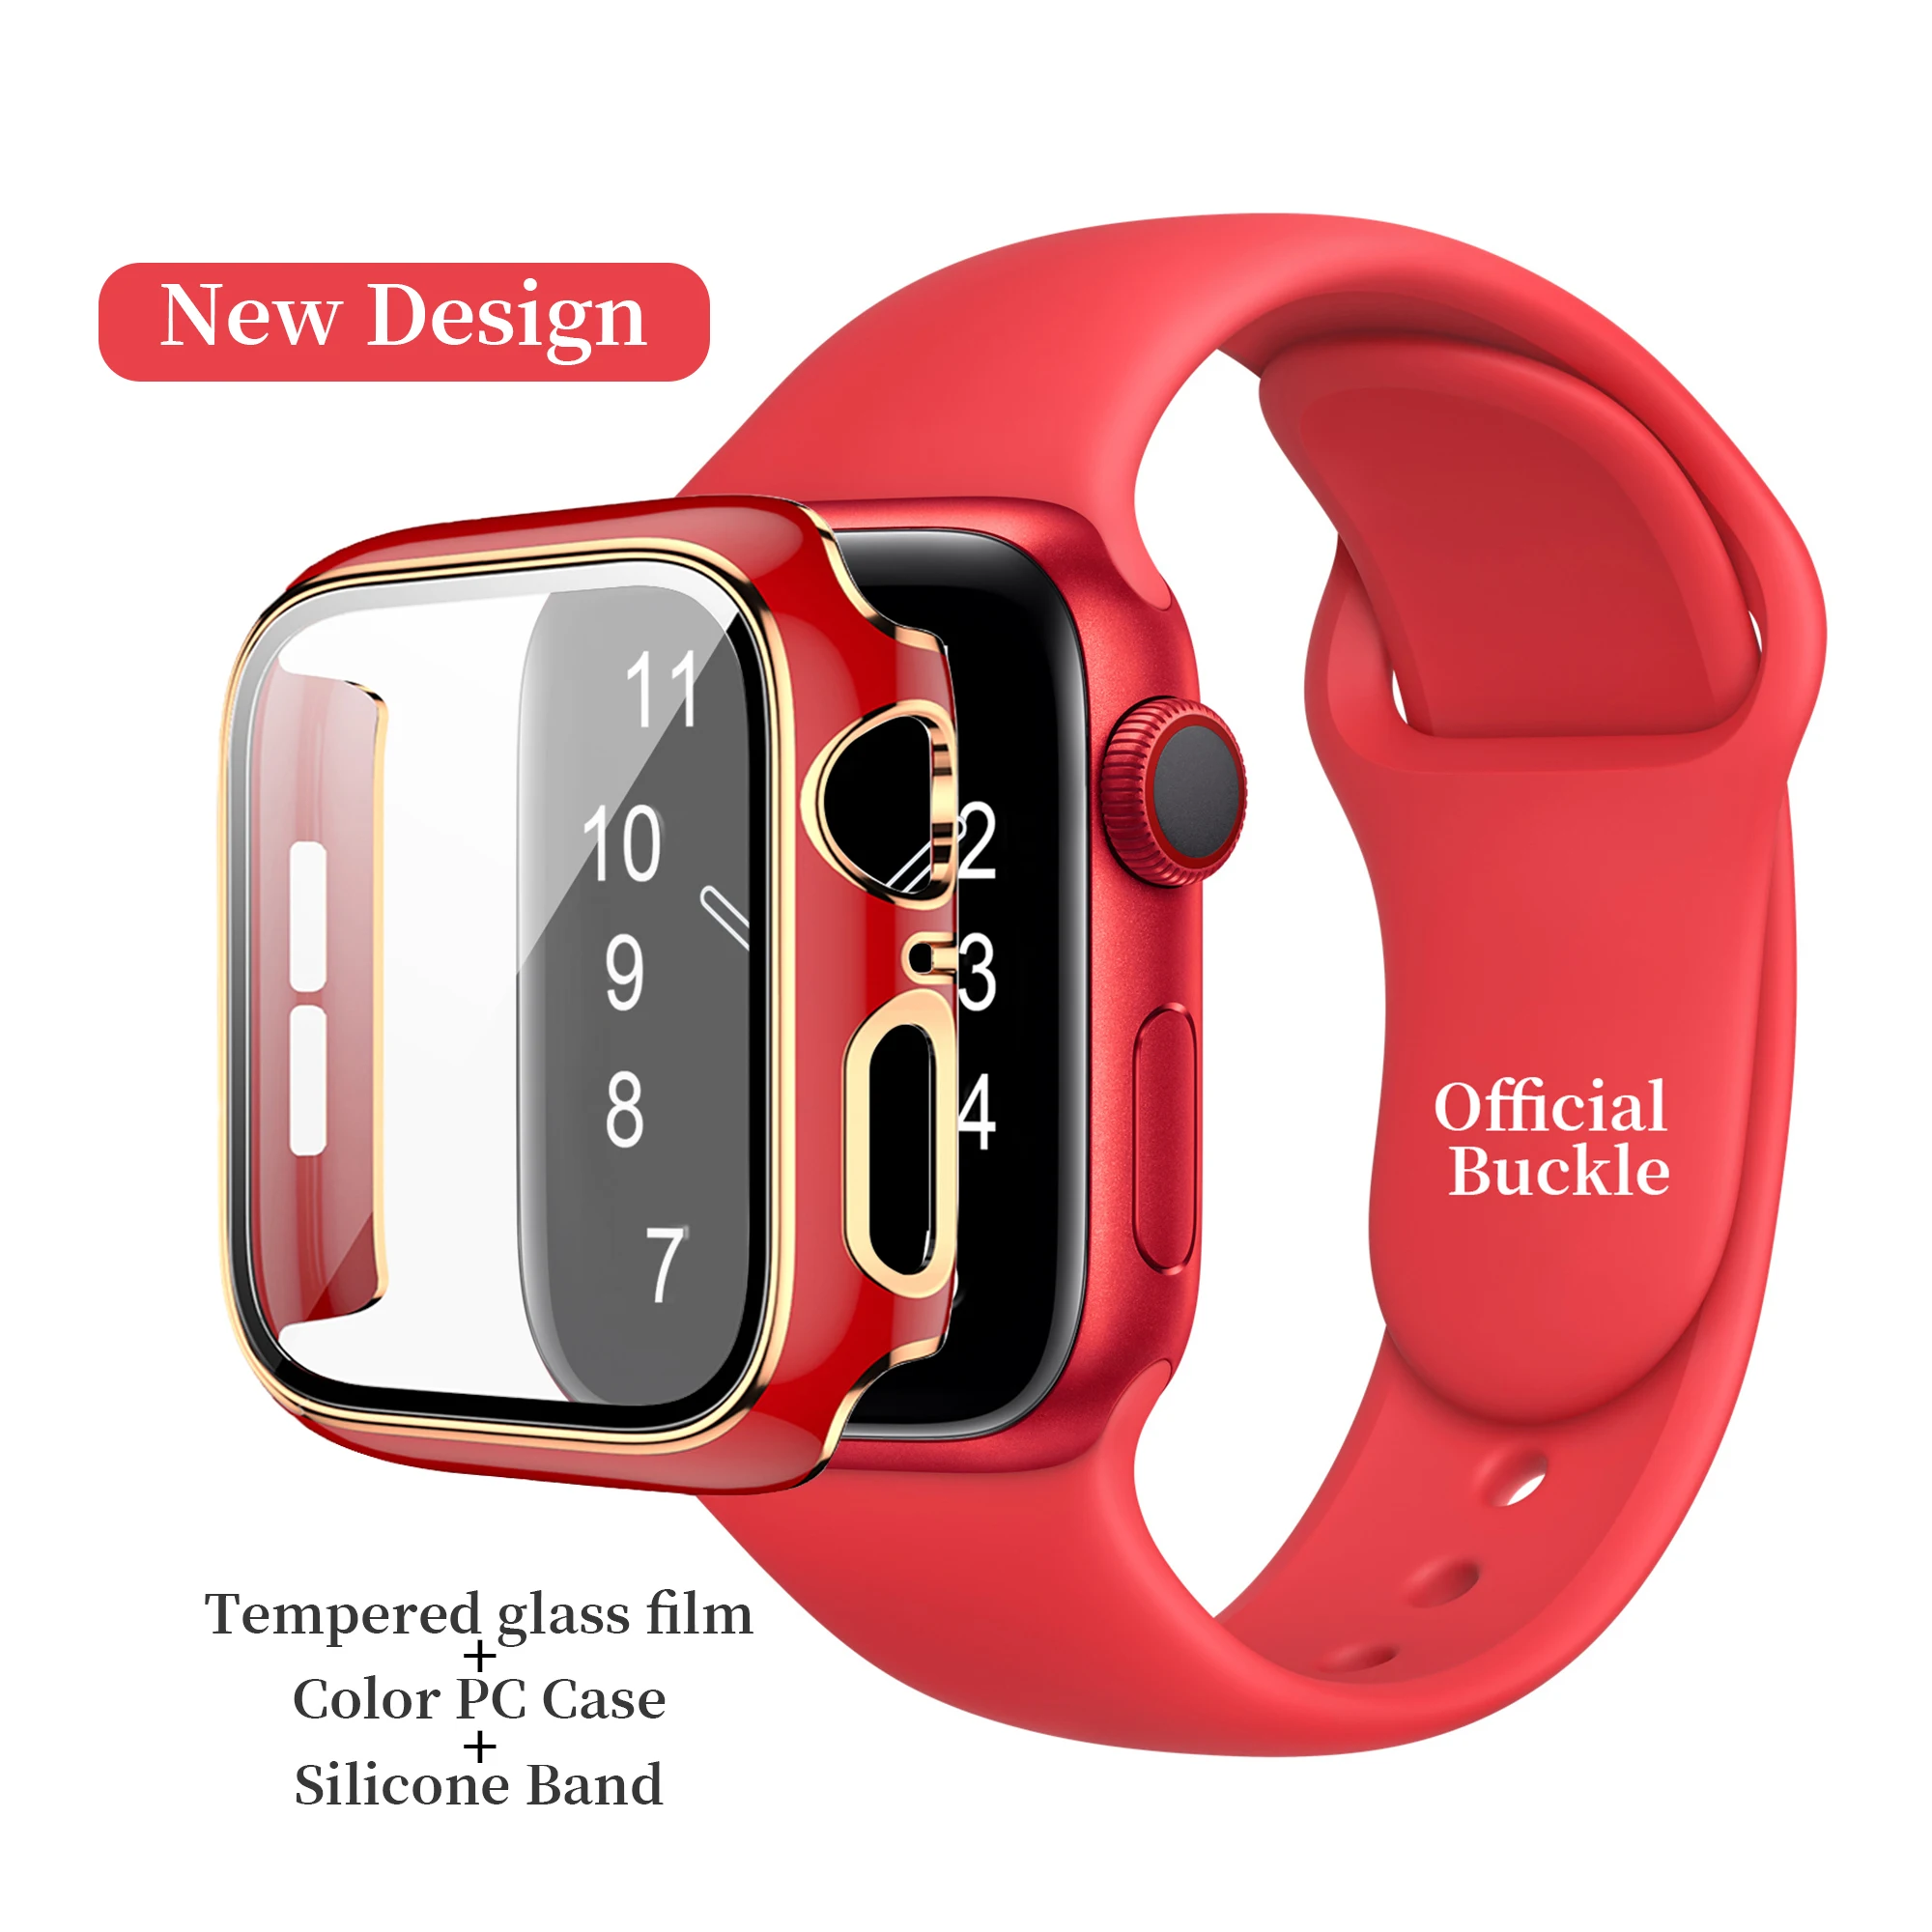 

New Colorful Cover + Rubber Strap, PC Watch Case With Tempered Glass Film + Silicone Sport Band For Apple iWatch SE 6 5 4 3 2 1, 16 colors choose